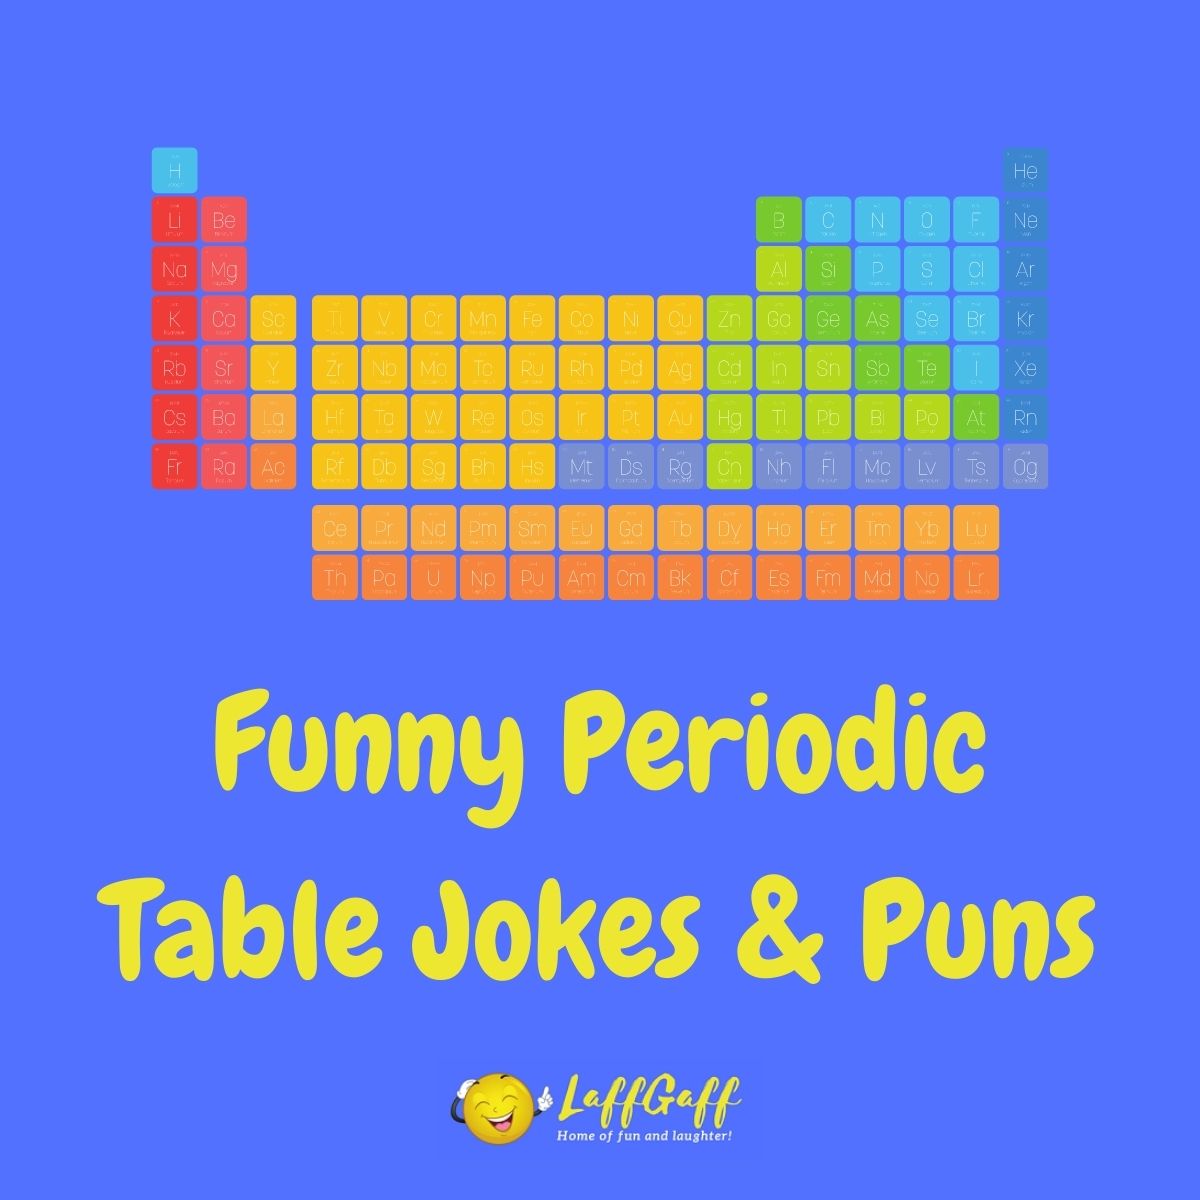 Featured image for a page of funny periodic table jokes and puns.